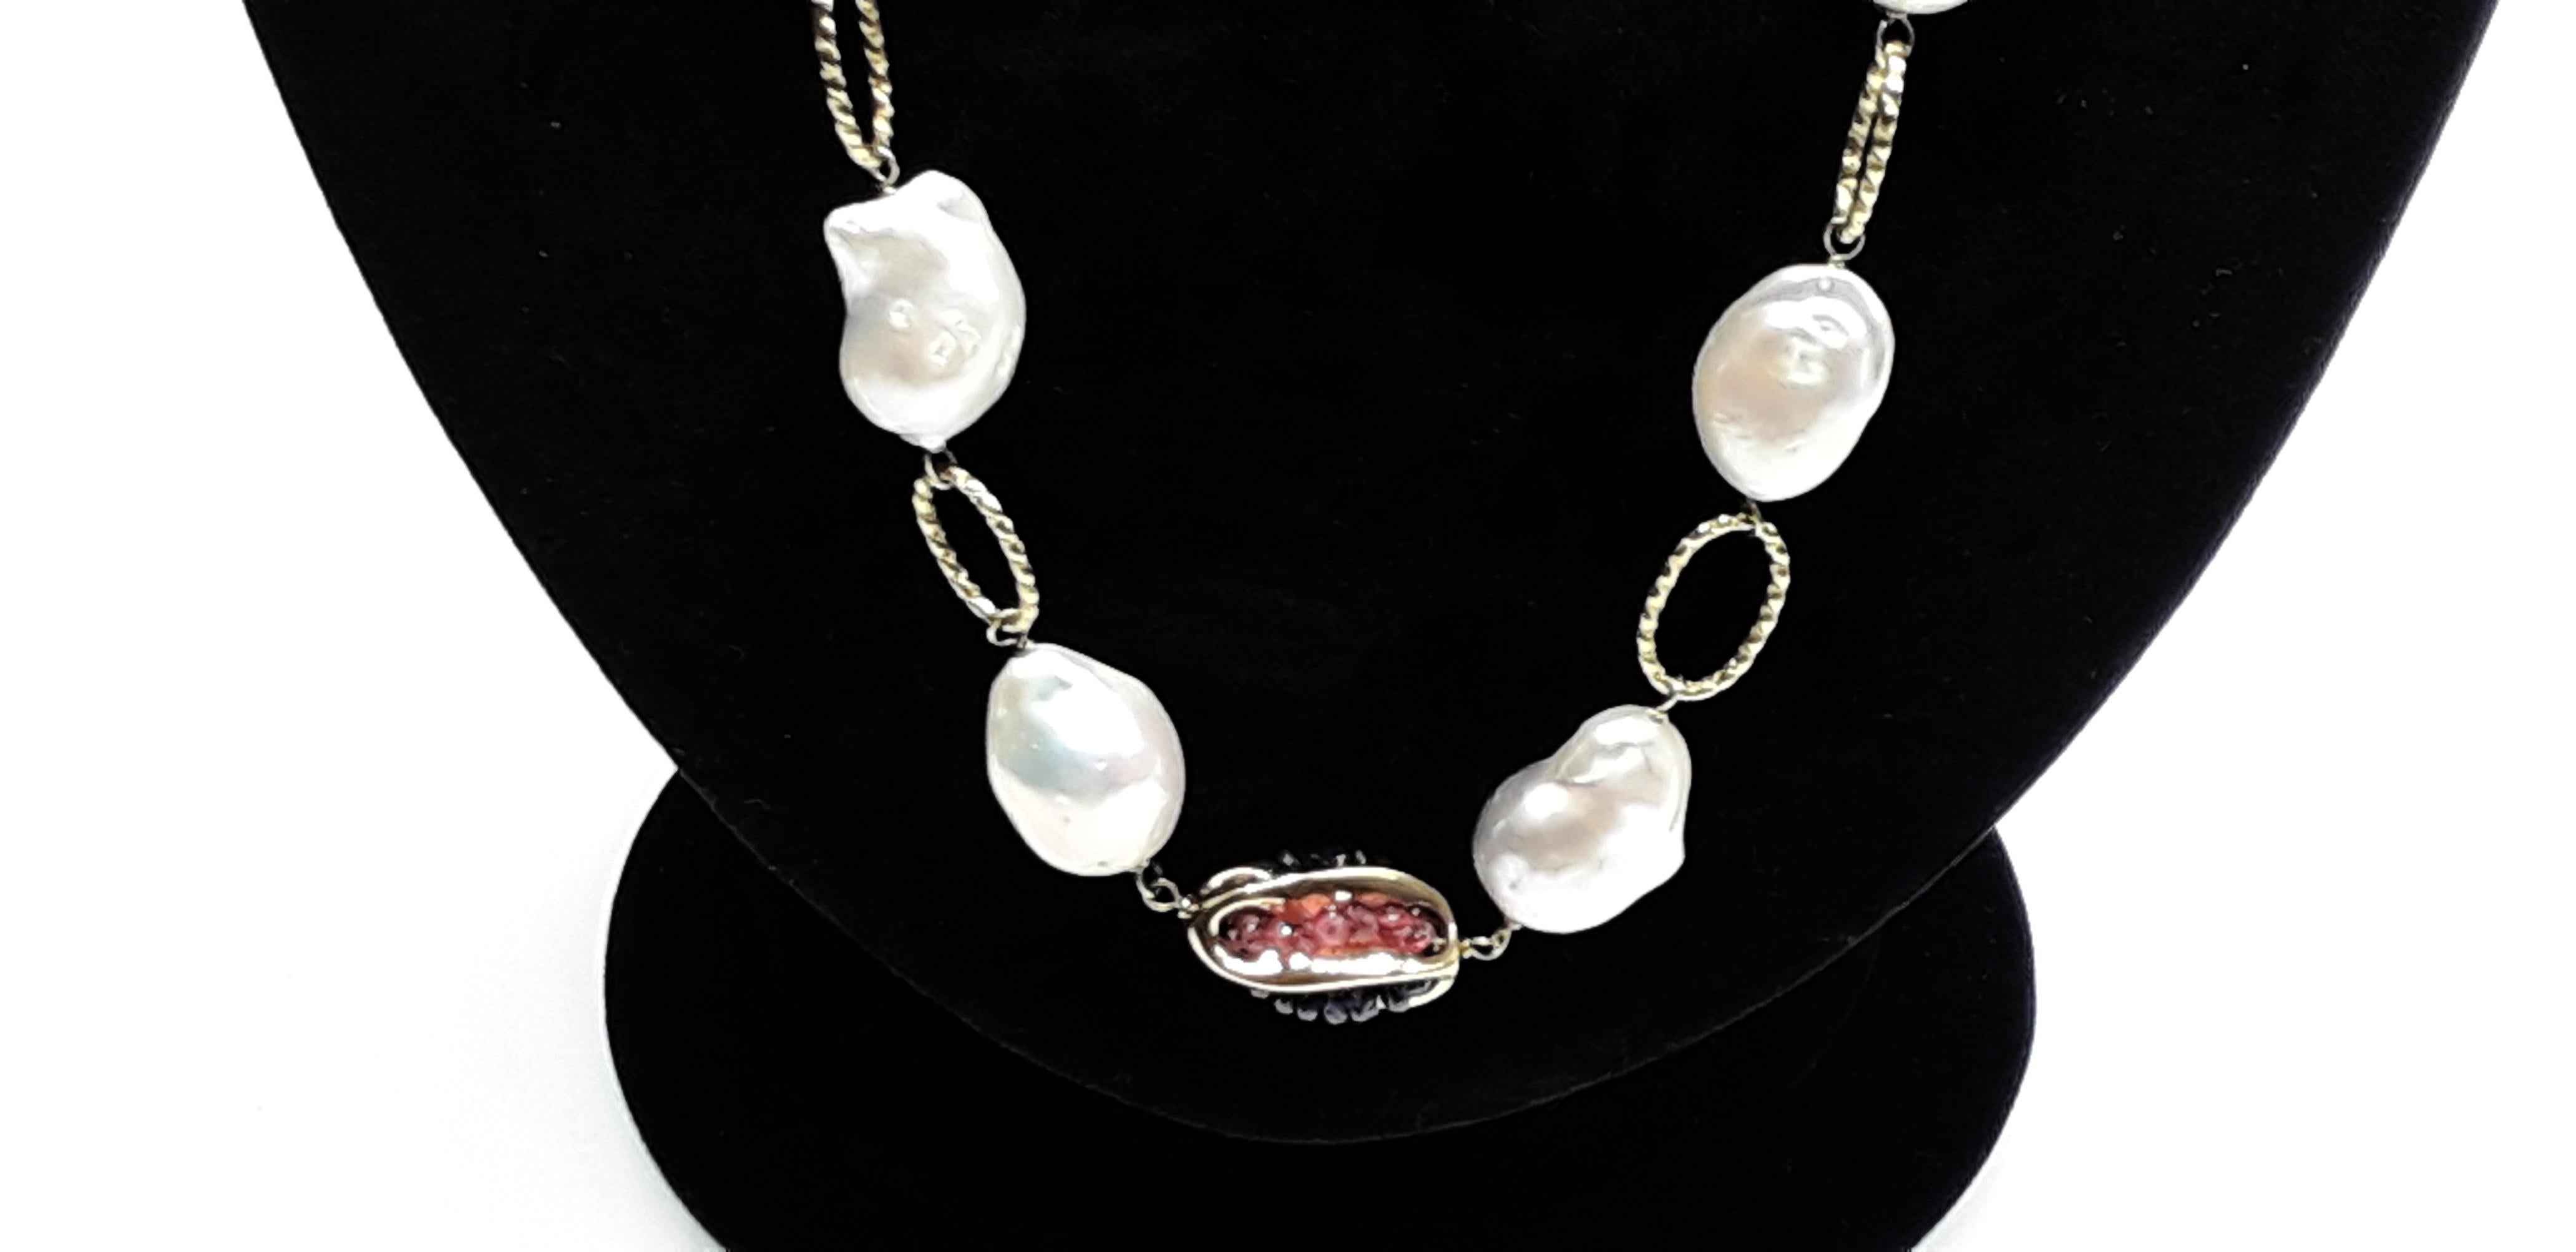 Refined necklace with 18K Gold chain. The necklace is characterized by river pearls alternated with red rubies and blue sapphires. High Italian gold craftsmanship. An ideal necklace for an summer evening.
